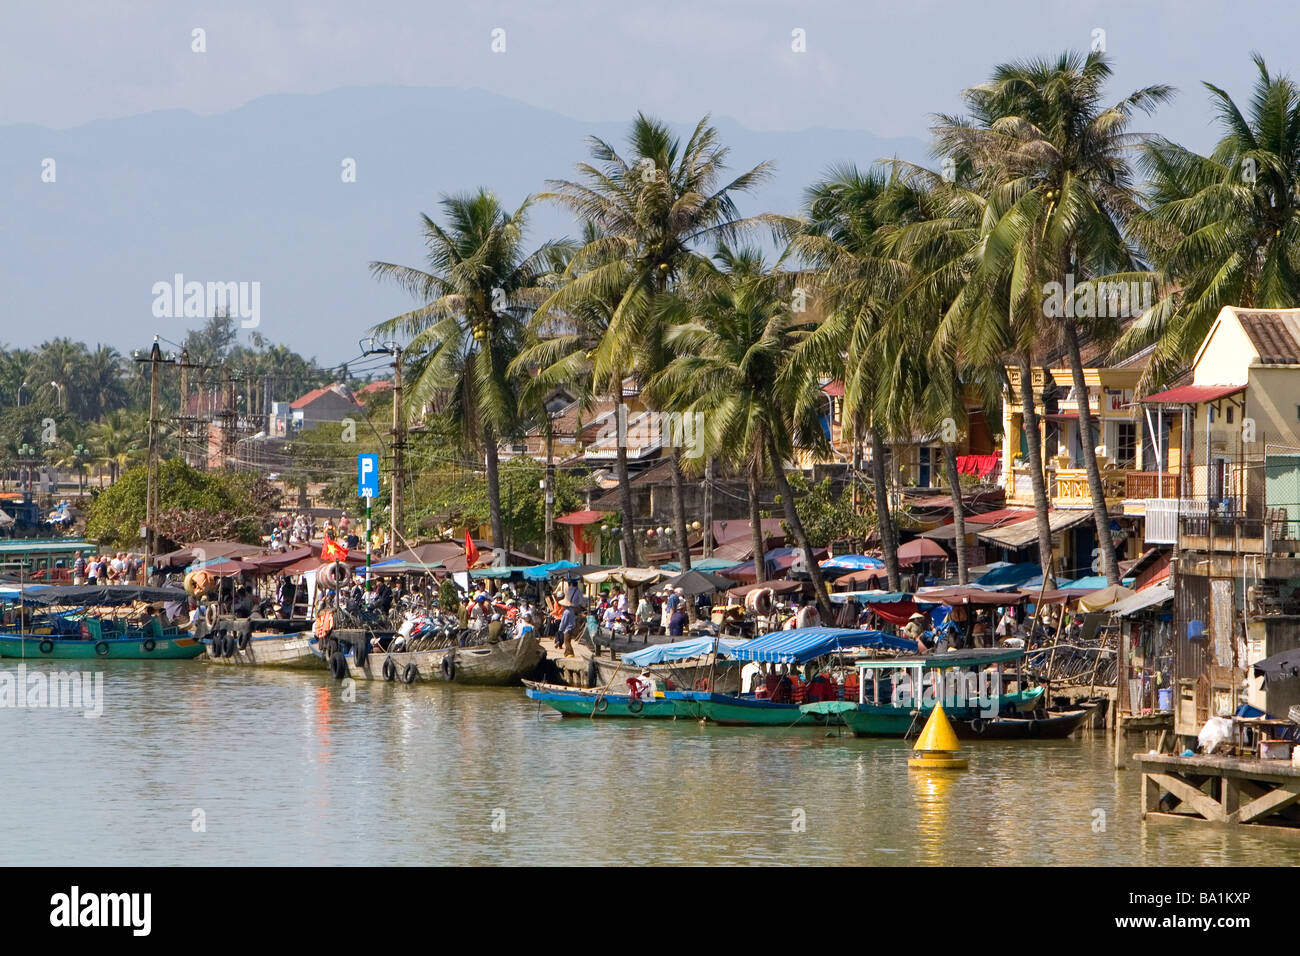 Boats on the Thu Bon River at Hoi An Vietnam Stock Photo